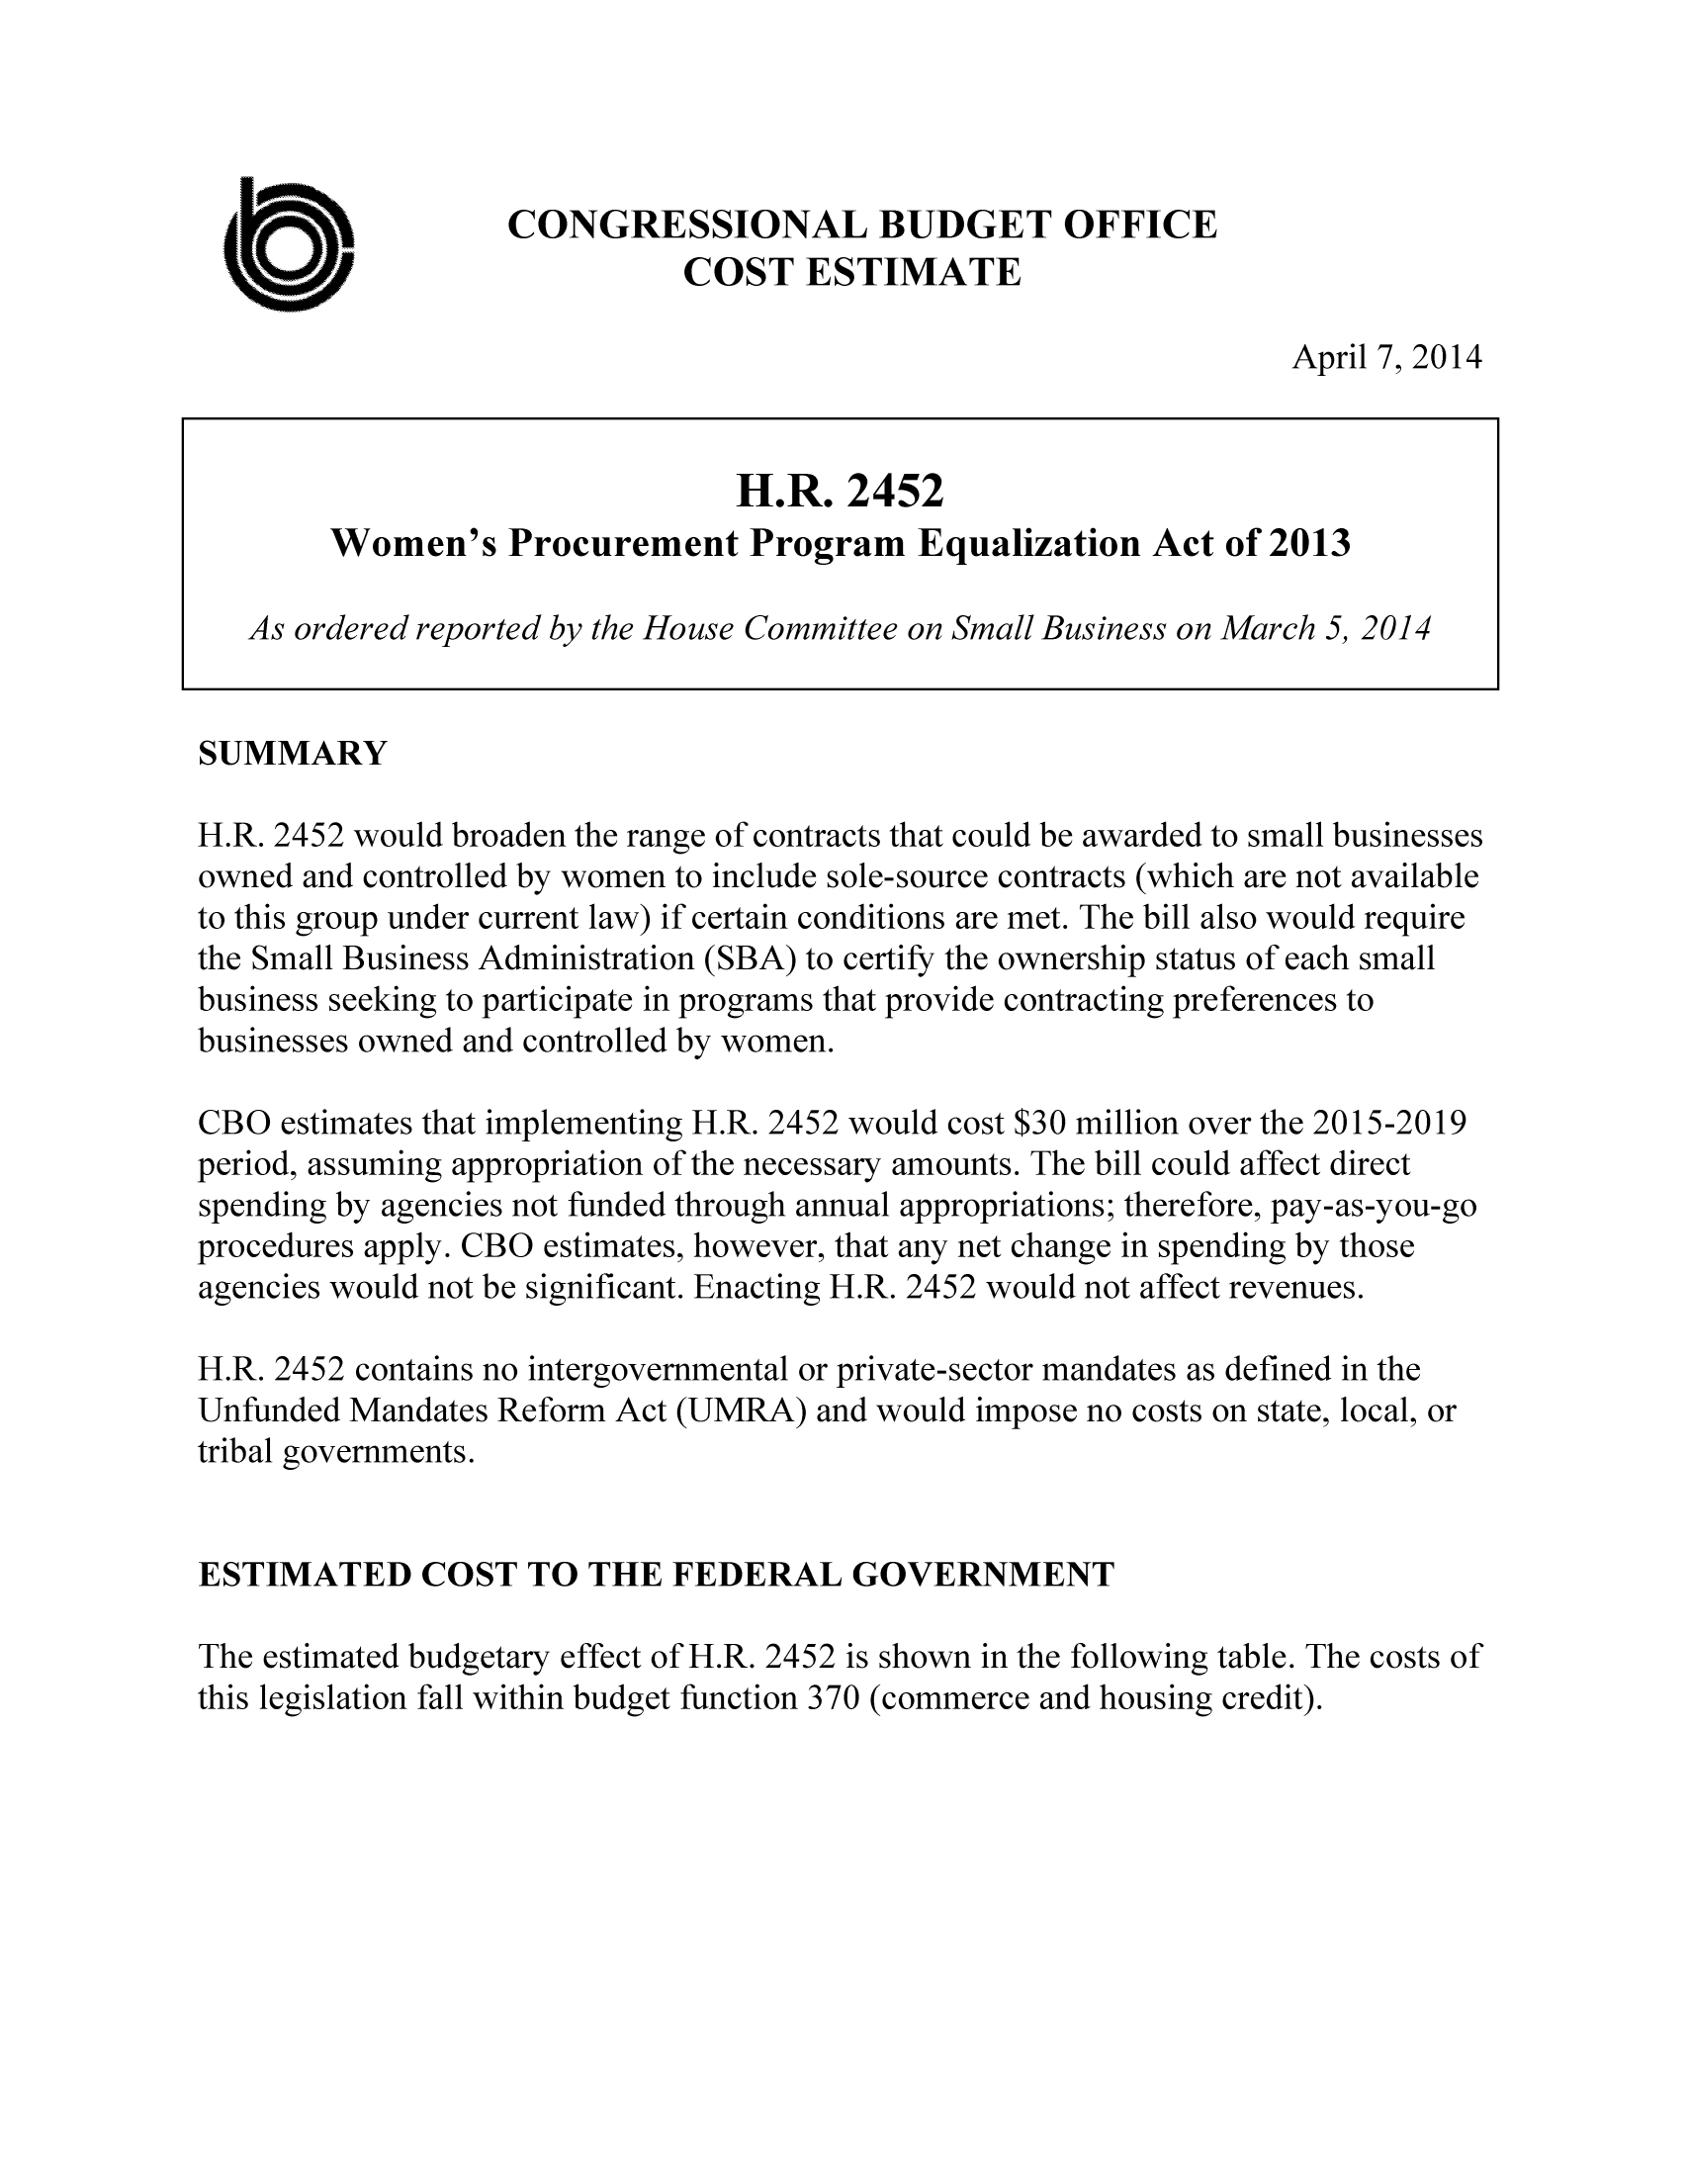 handle is hein.congrec/cbo1553 and id is 1 raw text is: CONGRESSIONAL BUDGET OFFICE
COST ESTIMATE
April 7, 2014
H.R. 2452
Women's Procurement Program Equalization Act of 2013
As ordered reported by the House Committee on Small Business on March 5, 2014
SUMMARY
H.R. 2452 would broaden the range of contracts that could be awarded to small businesses
owned and controlled by women to include sole-source contracts (which are not available
to this group under current law) if certain conditions are met. The bill also would require
the Small Business Administration (SBA) to certify the ownership status of each small
business seeking to participate in programs that provide contracting preferences to
businesses owned and controlled by women.
CBO estimates that implementing H.R. 2452 would cost $30 million over the 2015-2019
period, assuming appropriation of the necessary amounts. The bill could affect direct
spending by agencies not funded through annual appropriations; therefore, pay-as-you-go
procedures apply. CBO estimates, however, that any net change in spending by those
agencies would not be significant. Enacting H.R. 2452 would not affect revenues.
H.R. 2452 contains no intergovernmental or private-sector mandates as defined in the
Unfunded Mandates Reform Act (UMRA) and would impose no costs on state, local, or
tribal governments.
ESTIMATED COST TO THE FEDERAL GOVERNMENT
The estimated budgetary effect of H.R. 2452 is shown in the following table. The costs of
this legislation fall within budget function 370 (commerce and housing credit).


